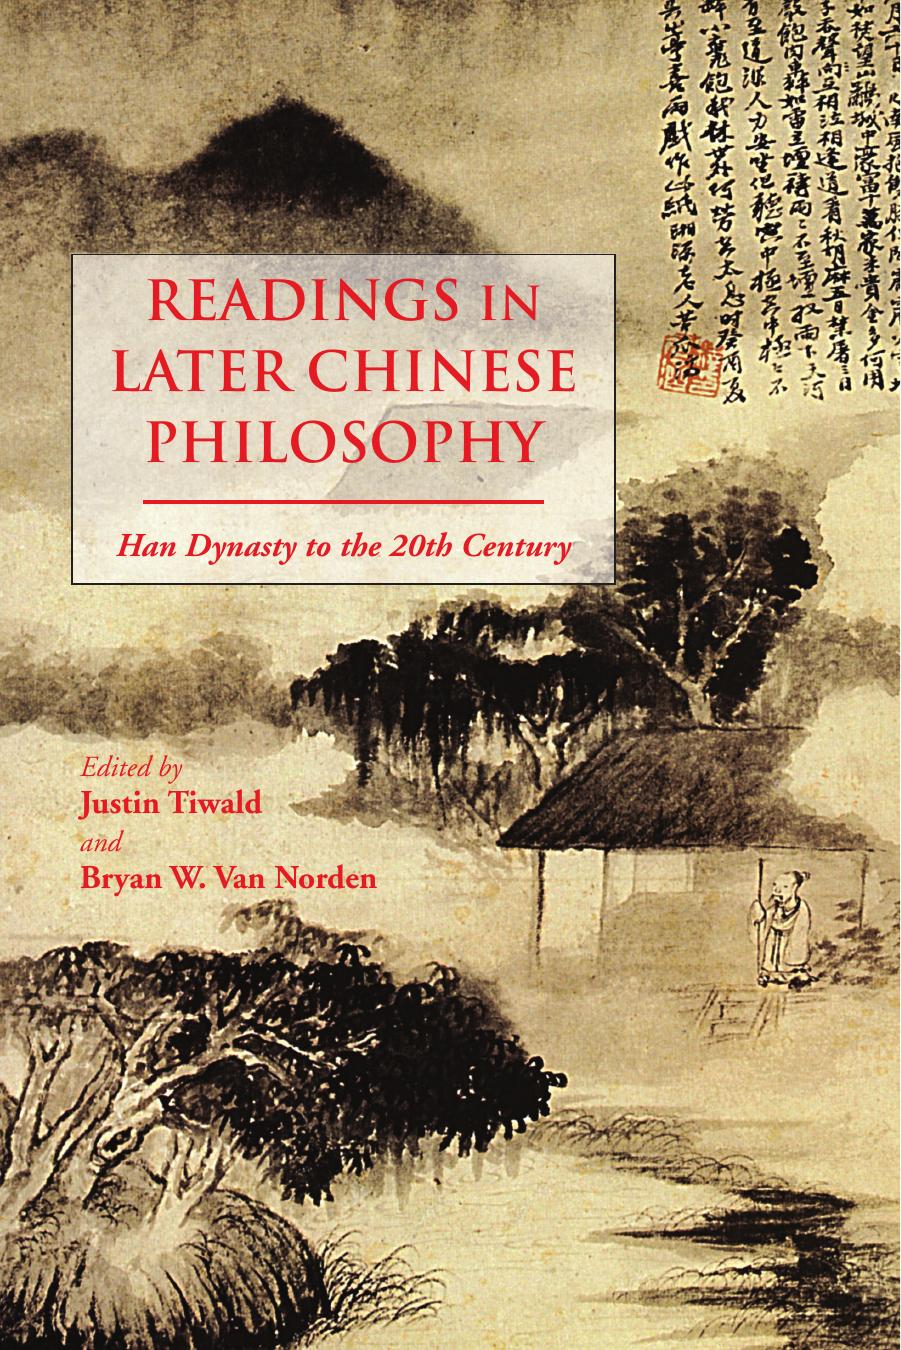 Readings in Later Chinese Philosophy: Han Dynasty to the 20th Century